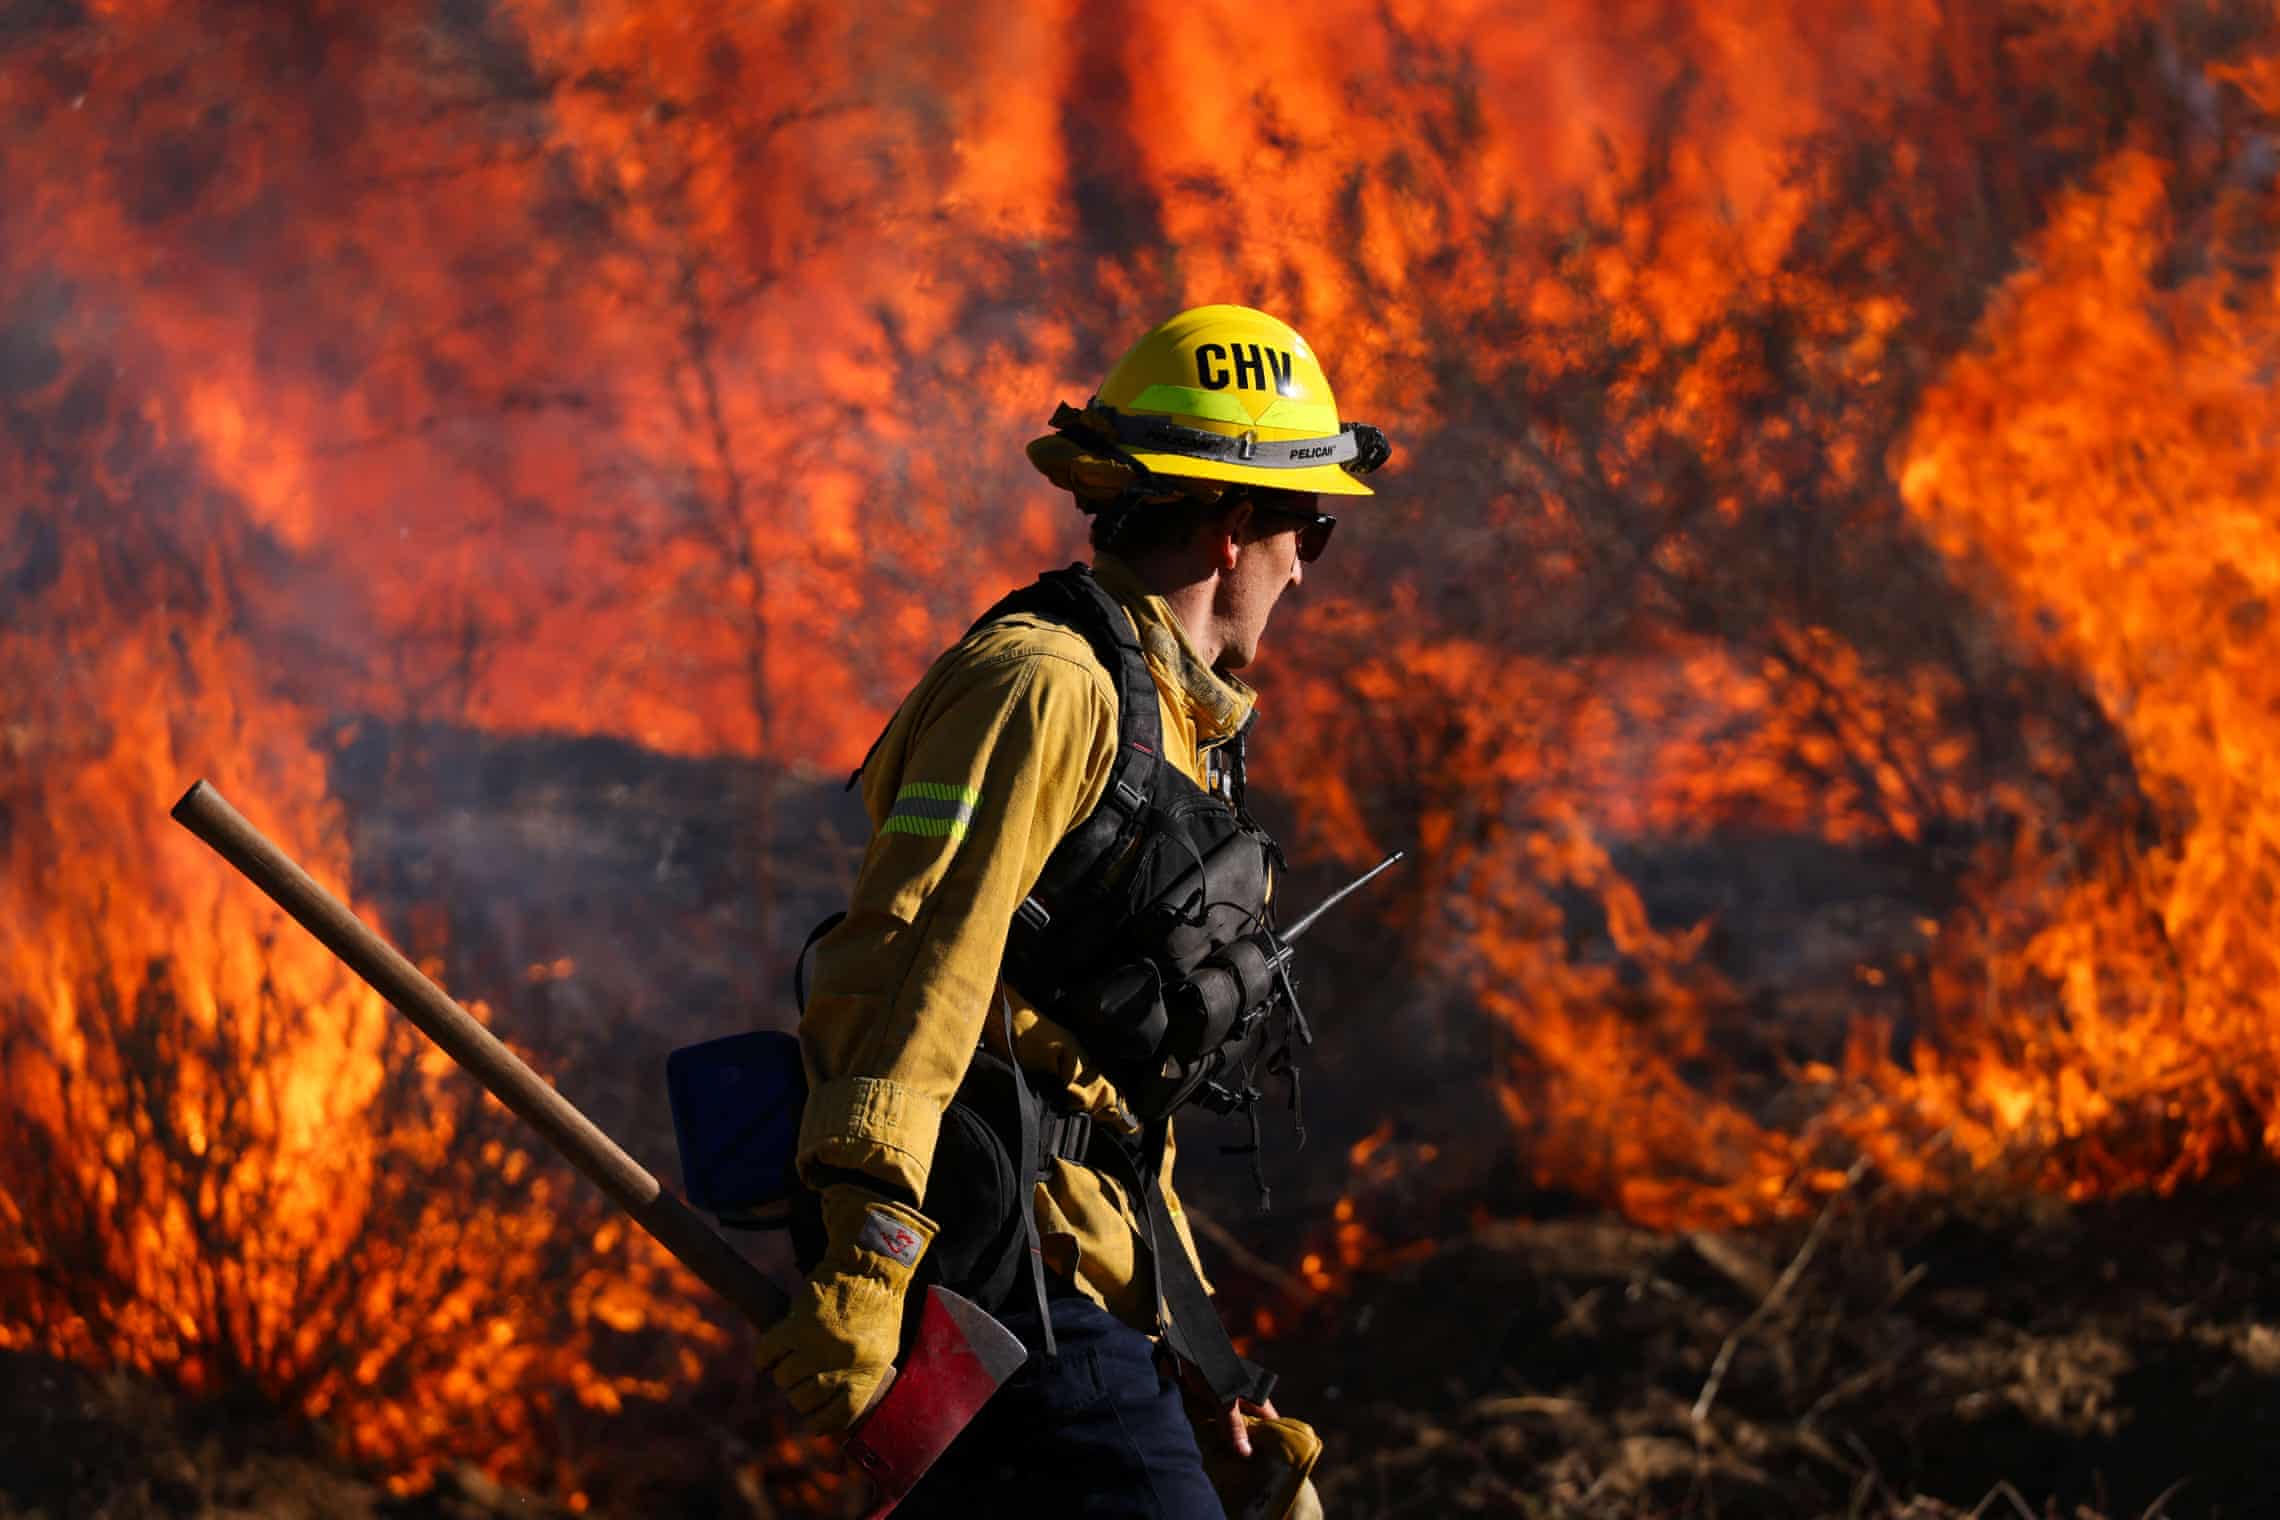 50,000 Californians prematurely died because of wildfires